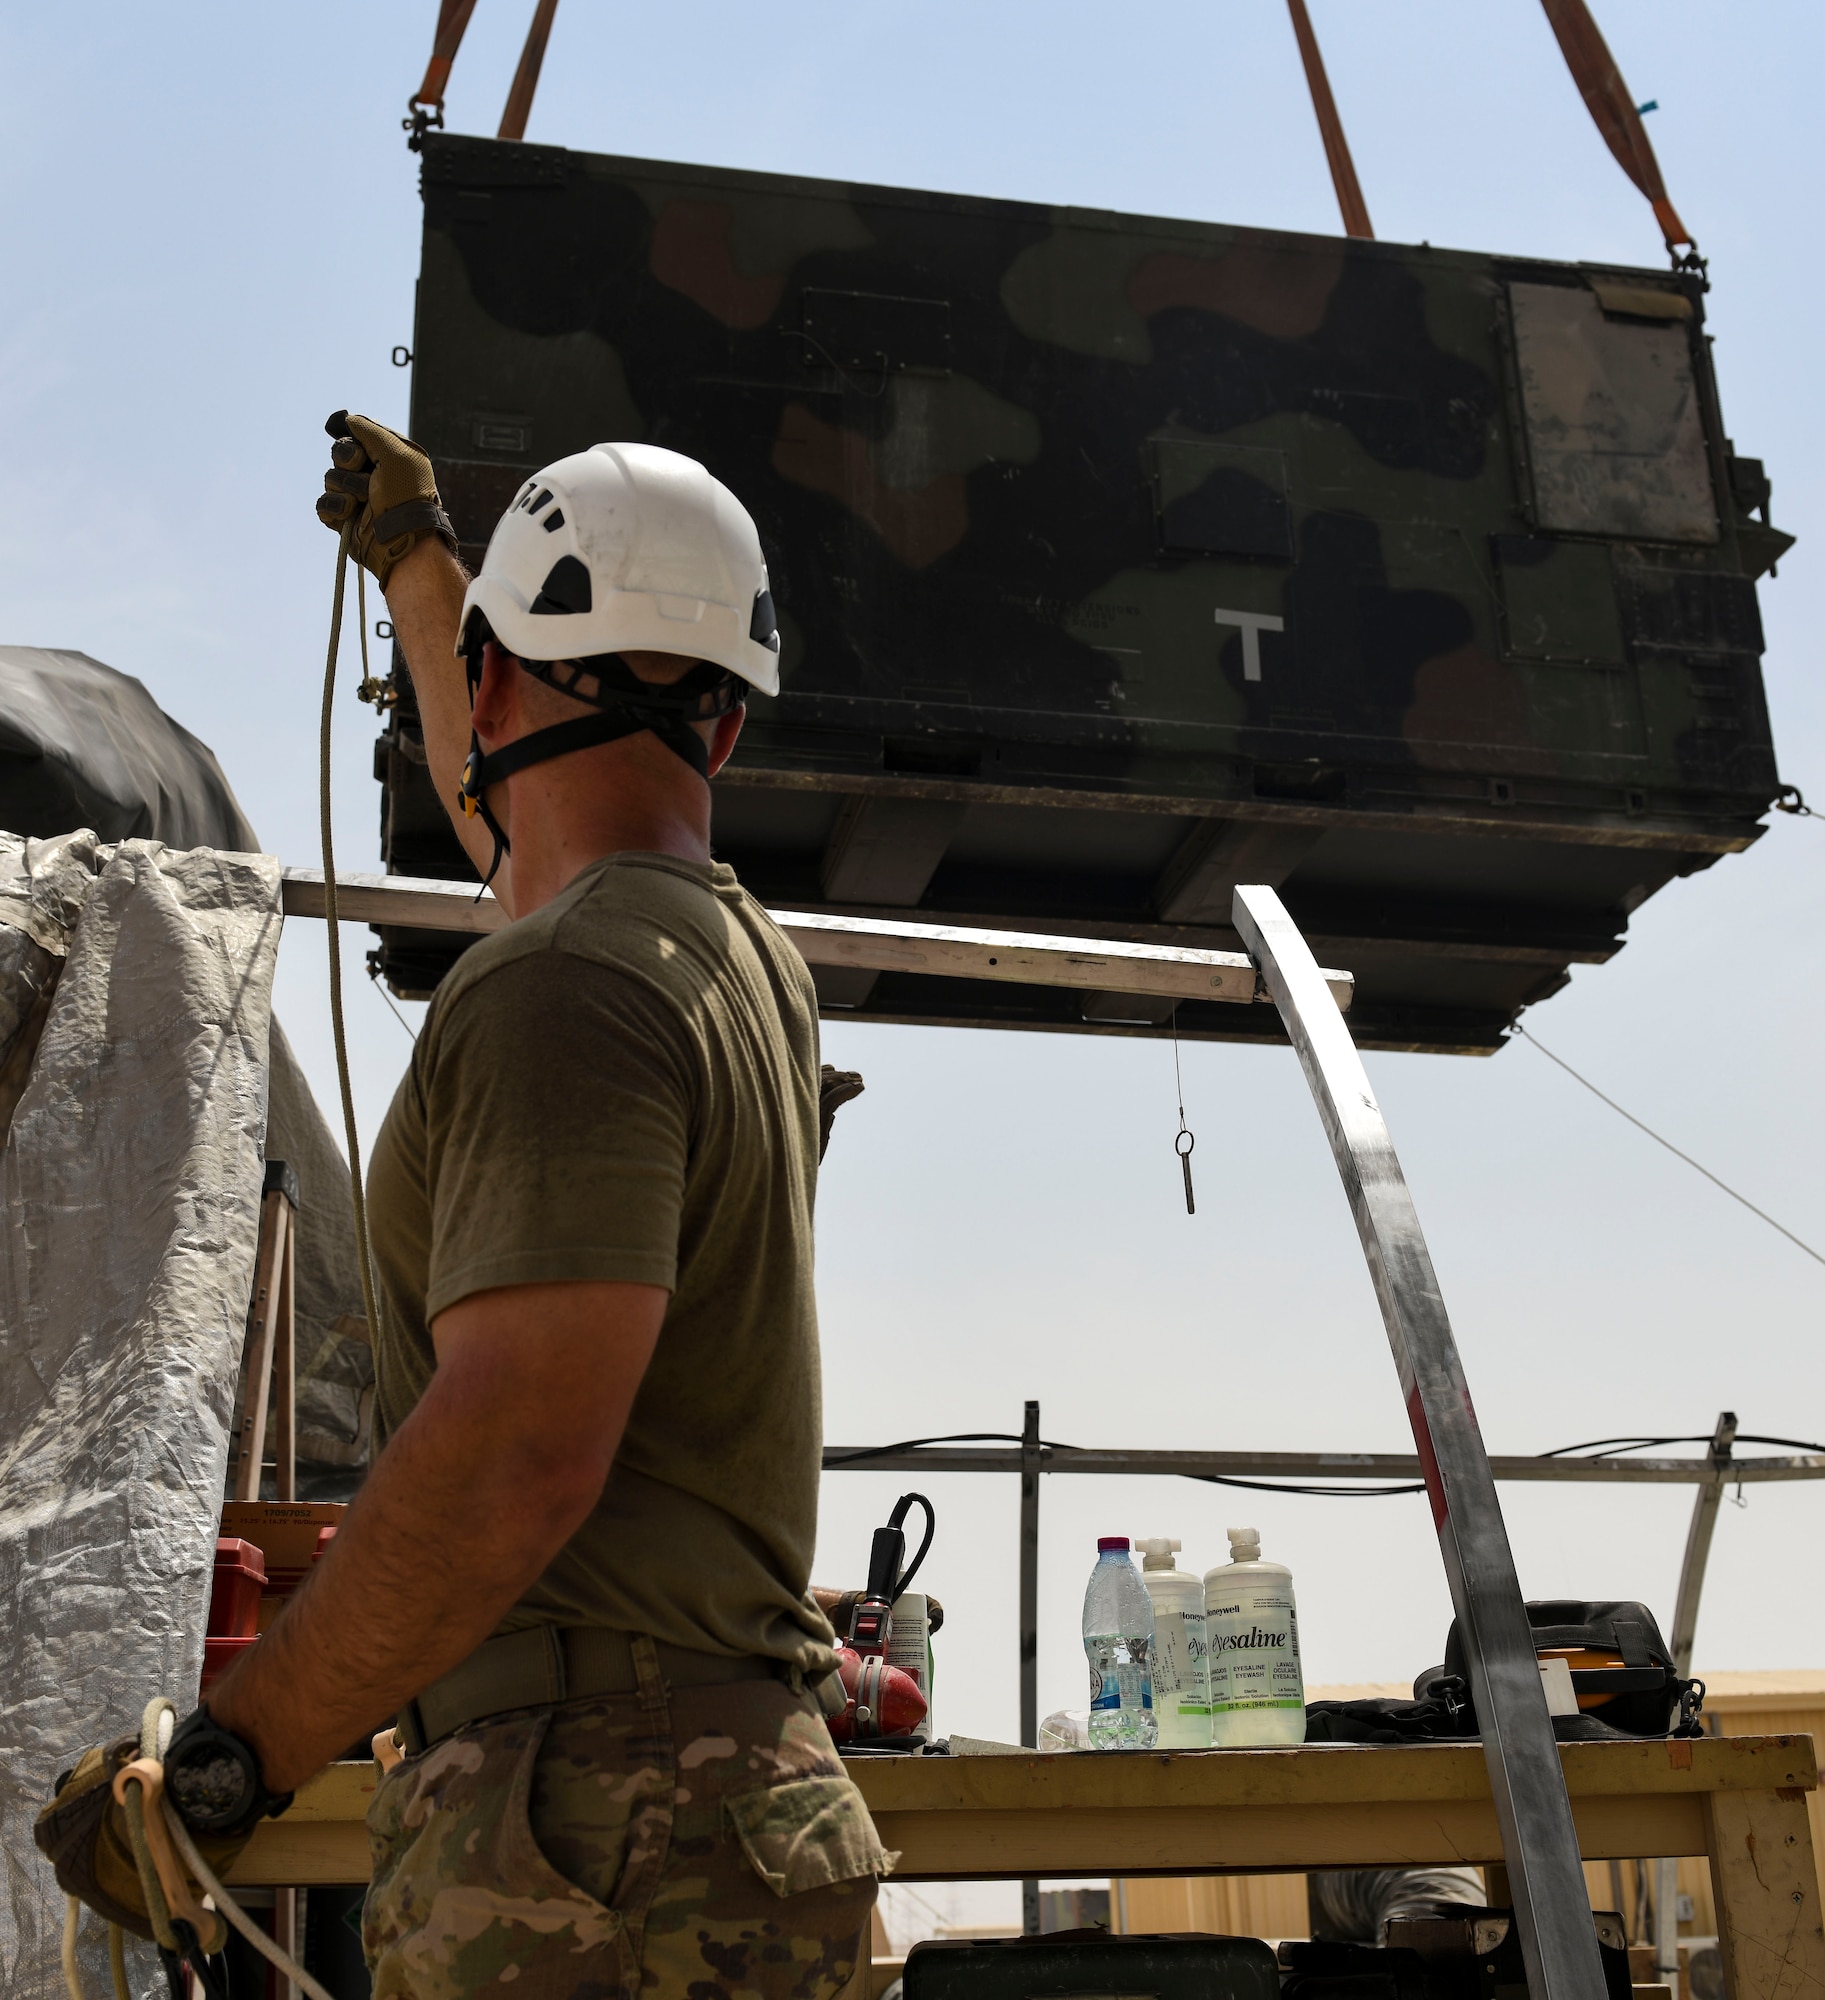 A U.S. Air Force Airman from the 727th Expeditionary Air Control Squadron, Detachment 3, holds a rope to help secure a replacement AN/TPS-75 radar system as it’s lowered into place as part of regular maintenance July 27, 2021, at Al Udeid Air Base, Qatar. 727th EACS radar technicians perform several hours of maintenance and calibration daily to ensure radar systems perform at optimal levels. (U.S. Air Force by Staff Sgt. Alexandria Lee)